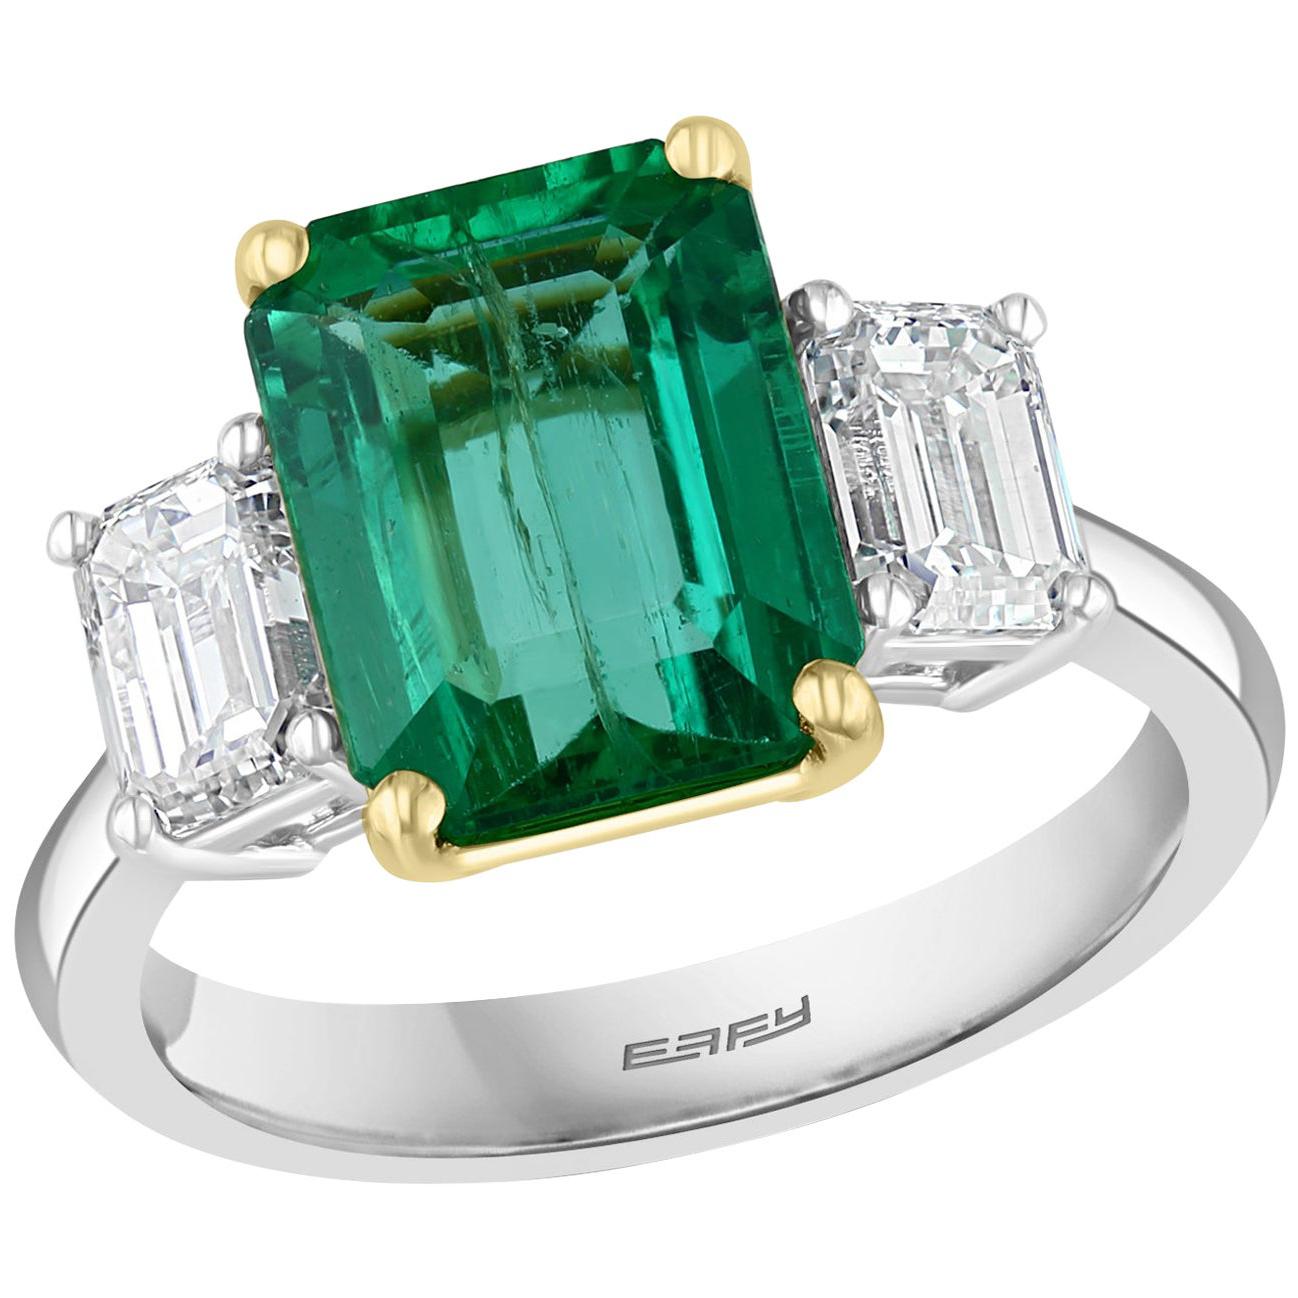 Effy Hematian 18 Karat White and Yellow Gold Diamond and Emerald 3-Stone Ring For Sale